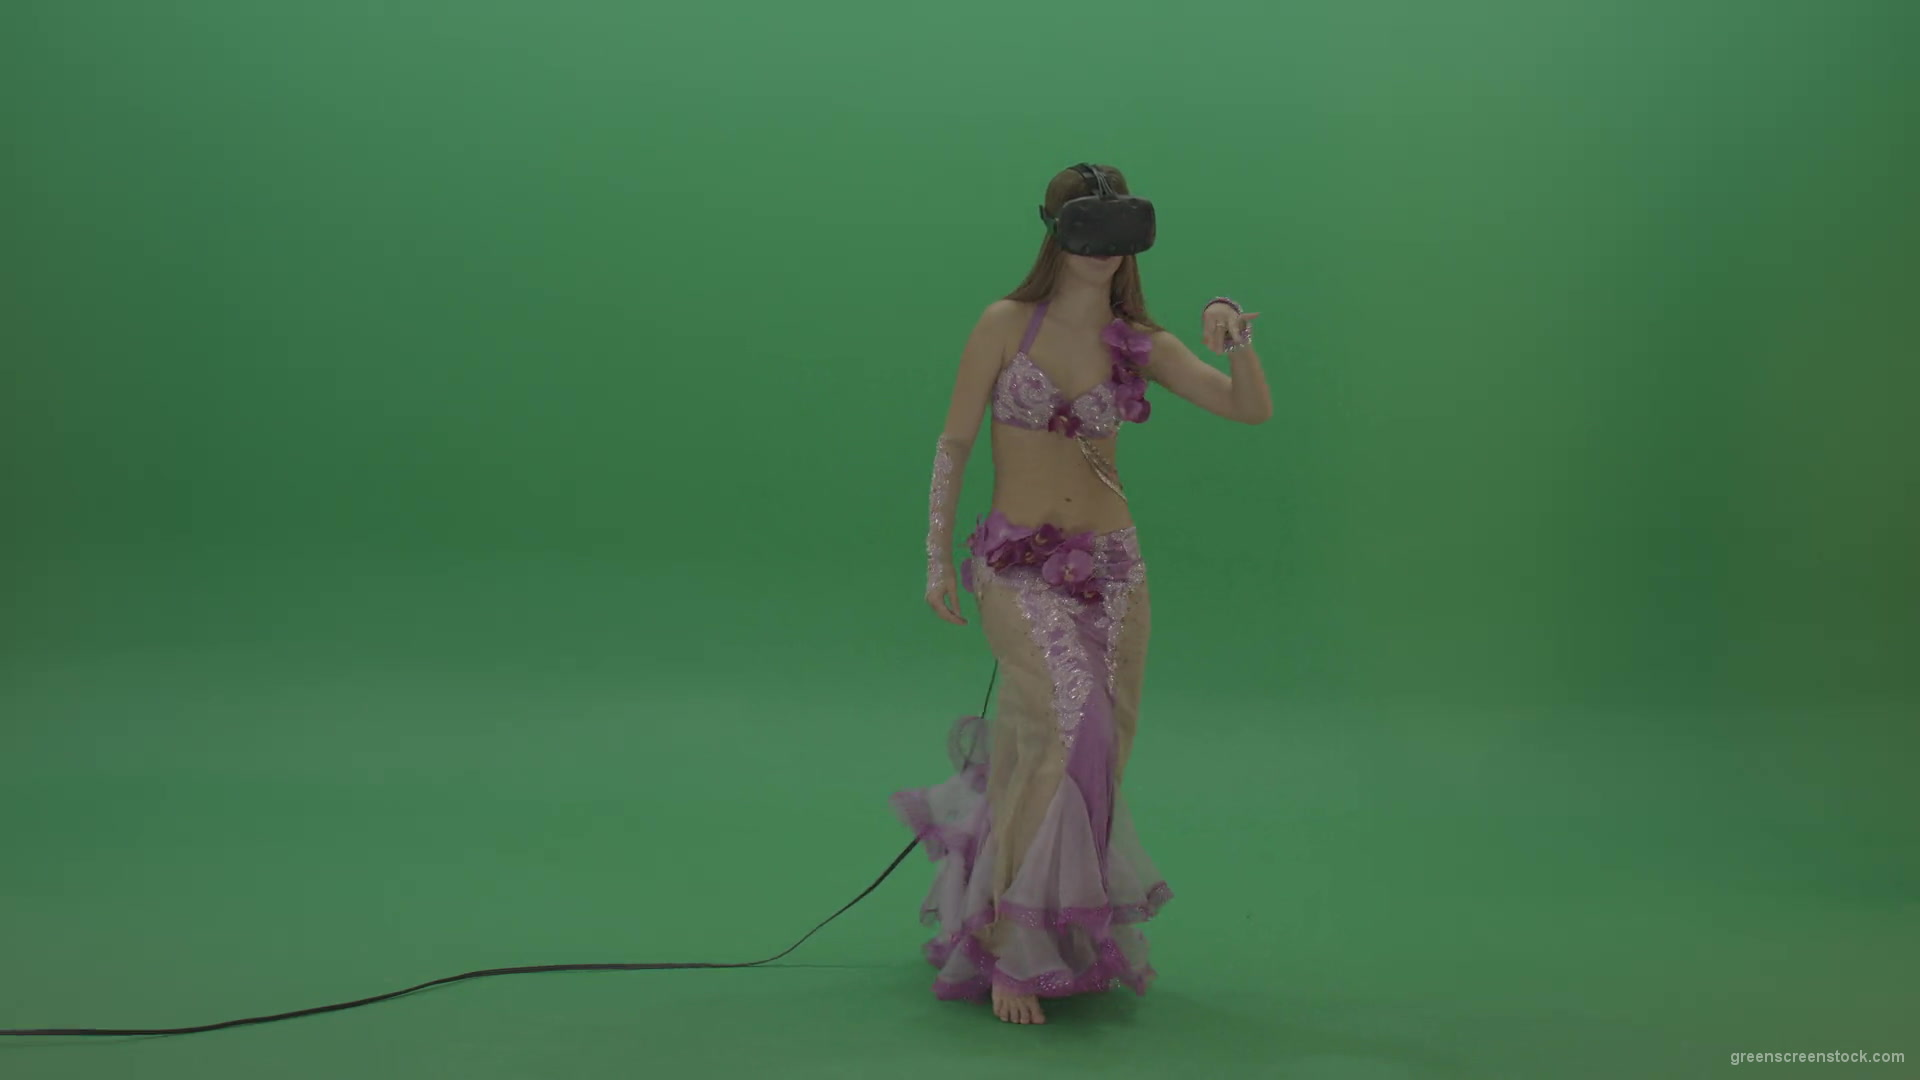 Beautiful-belly-dancer-in-purple-wear-and-VR-headset-dances-over-green-screen-background-1920_002 Green Screen Stock